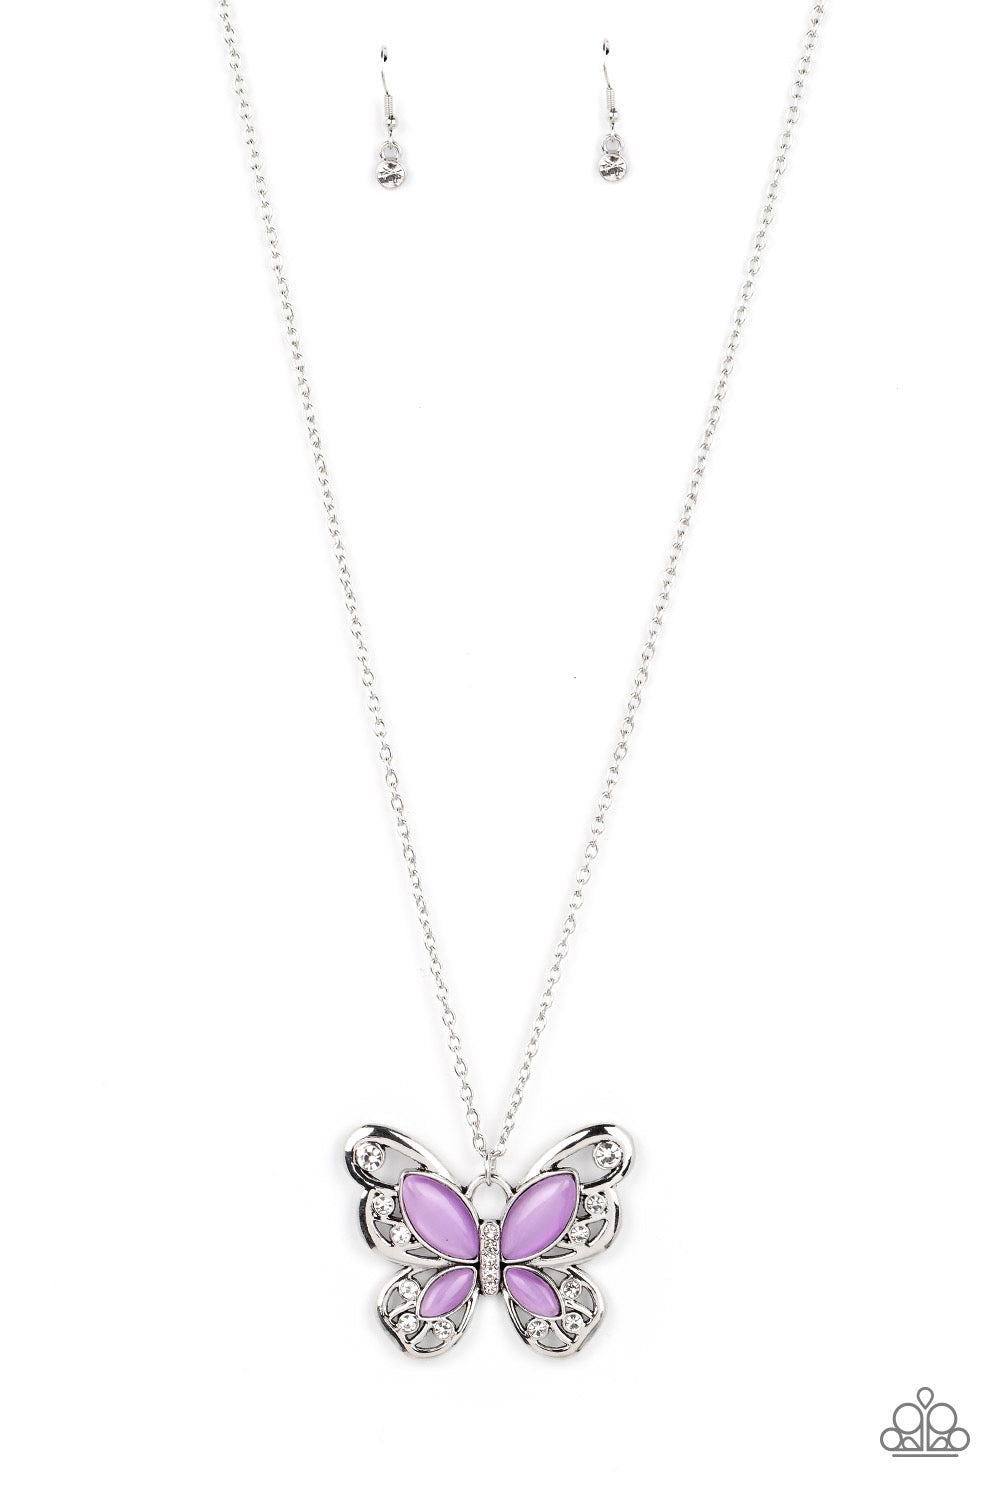 Paparazzi Wings Of Whimsy - Purple Butterfly Necklace 